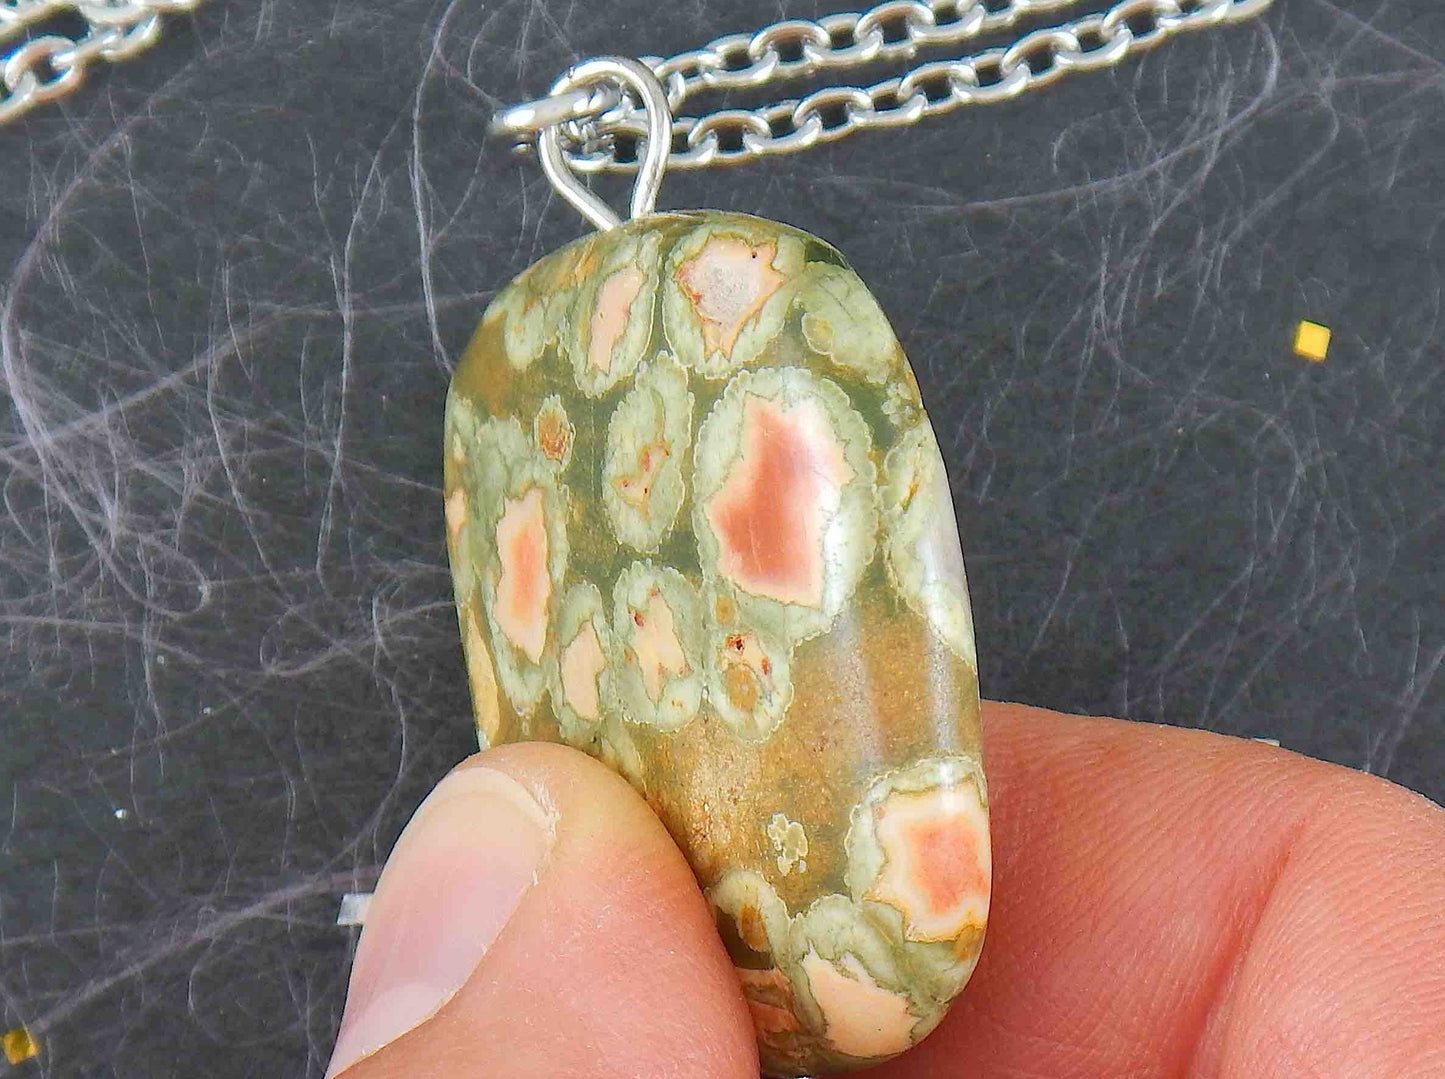 25-inch necklace with smooth square pendant of golden green and red rainforest jasper stone, stainless steel chain